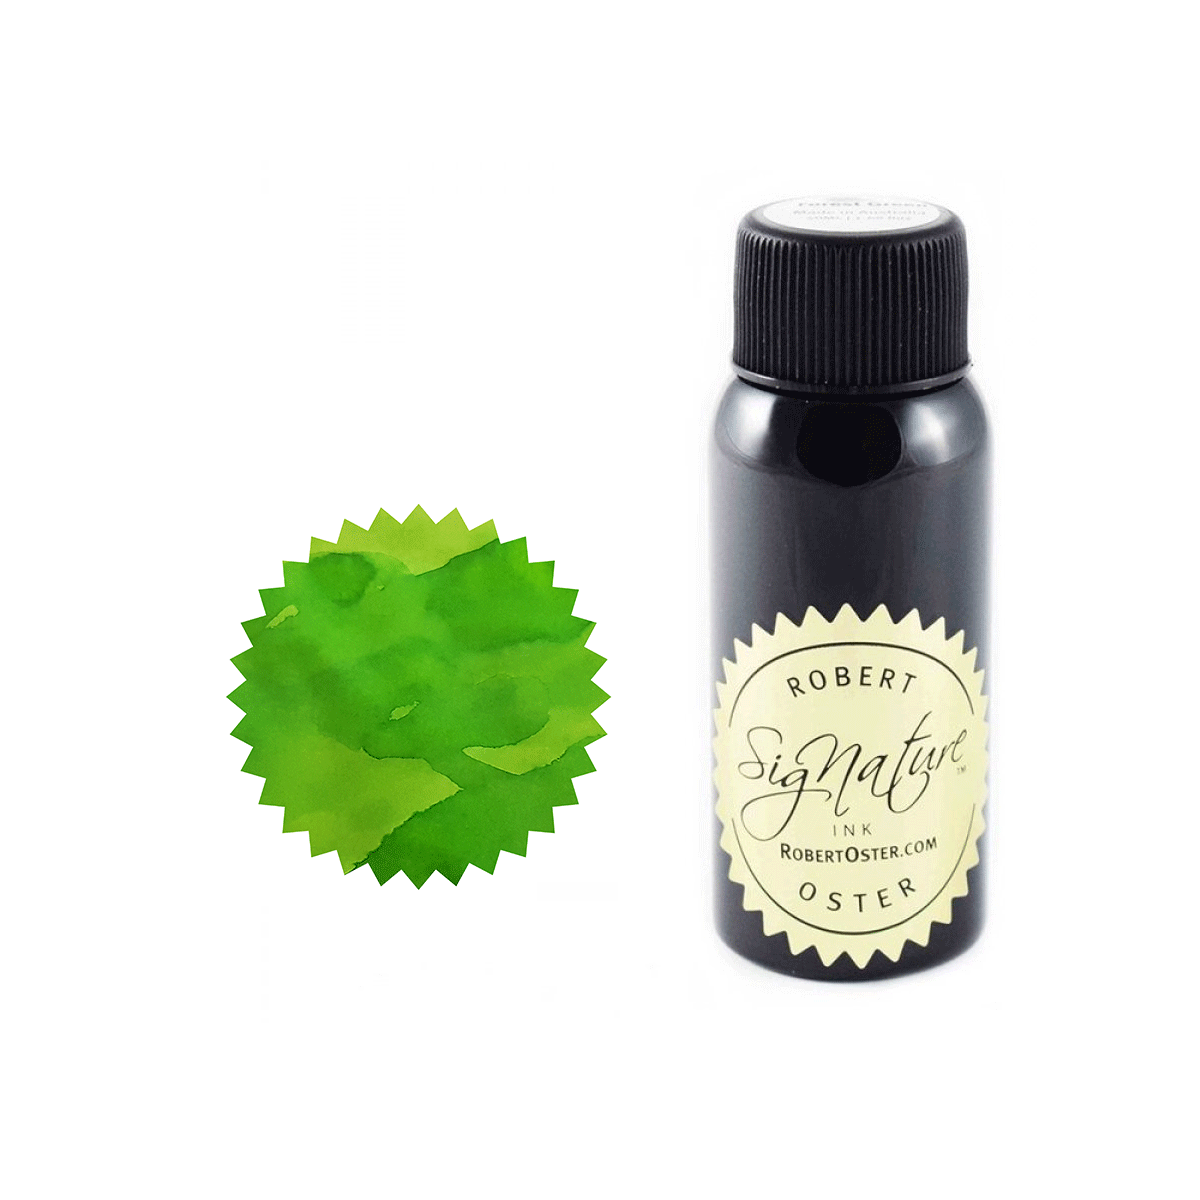 Robert Oster Signature Ink Bottle Green Lime - Pencraft the boutique